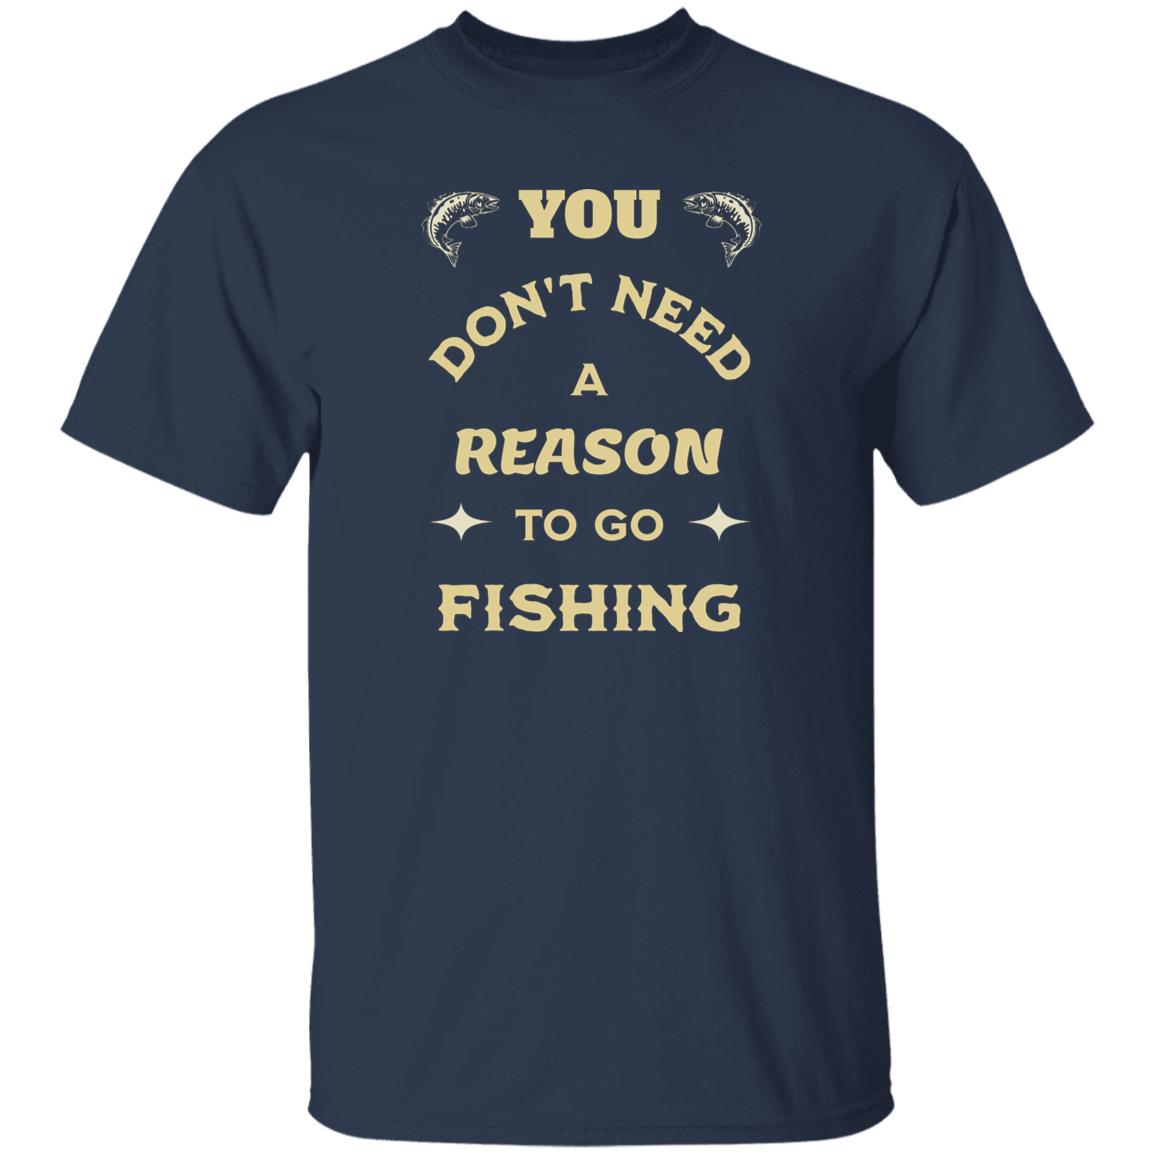 You don't need a reason to go fishing k t-shirt navy